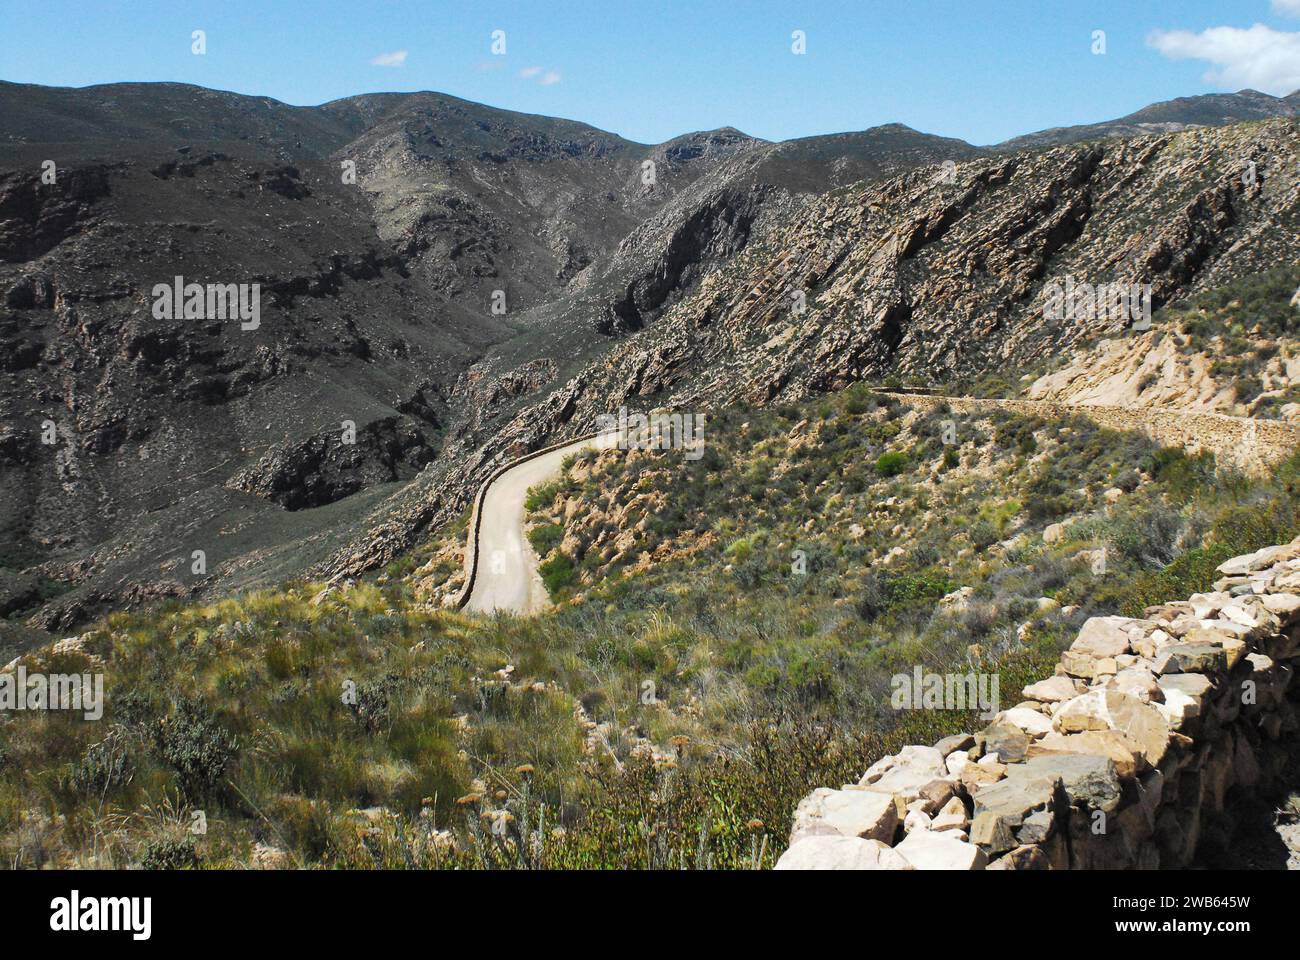 Panoramic overview of a rough, narrow, winding dirt road through the remote Swartberg mountains near Knysna, South Africa on a sunny Summer day. Stock Photo